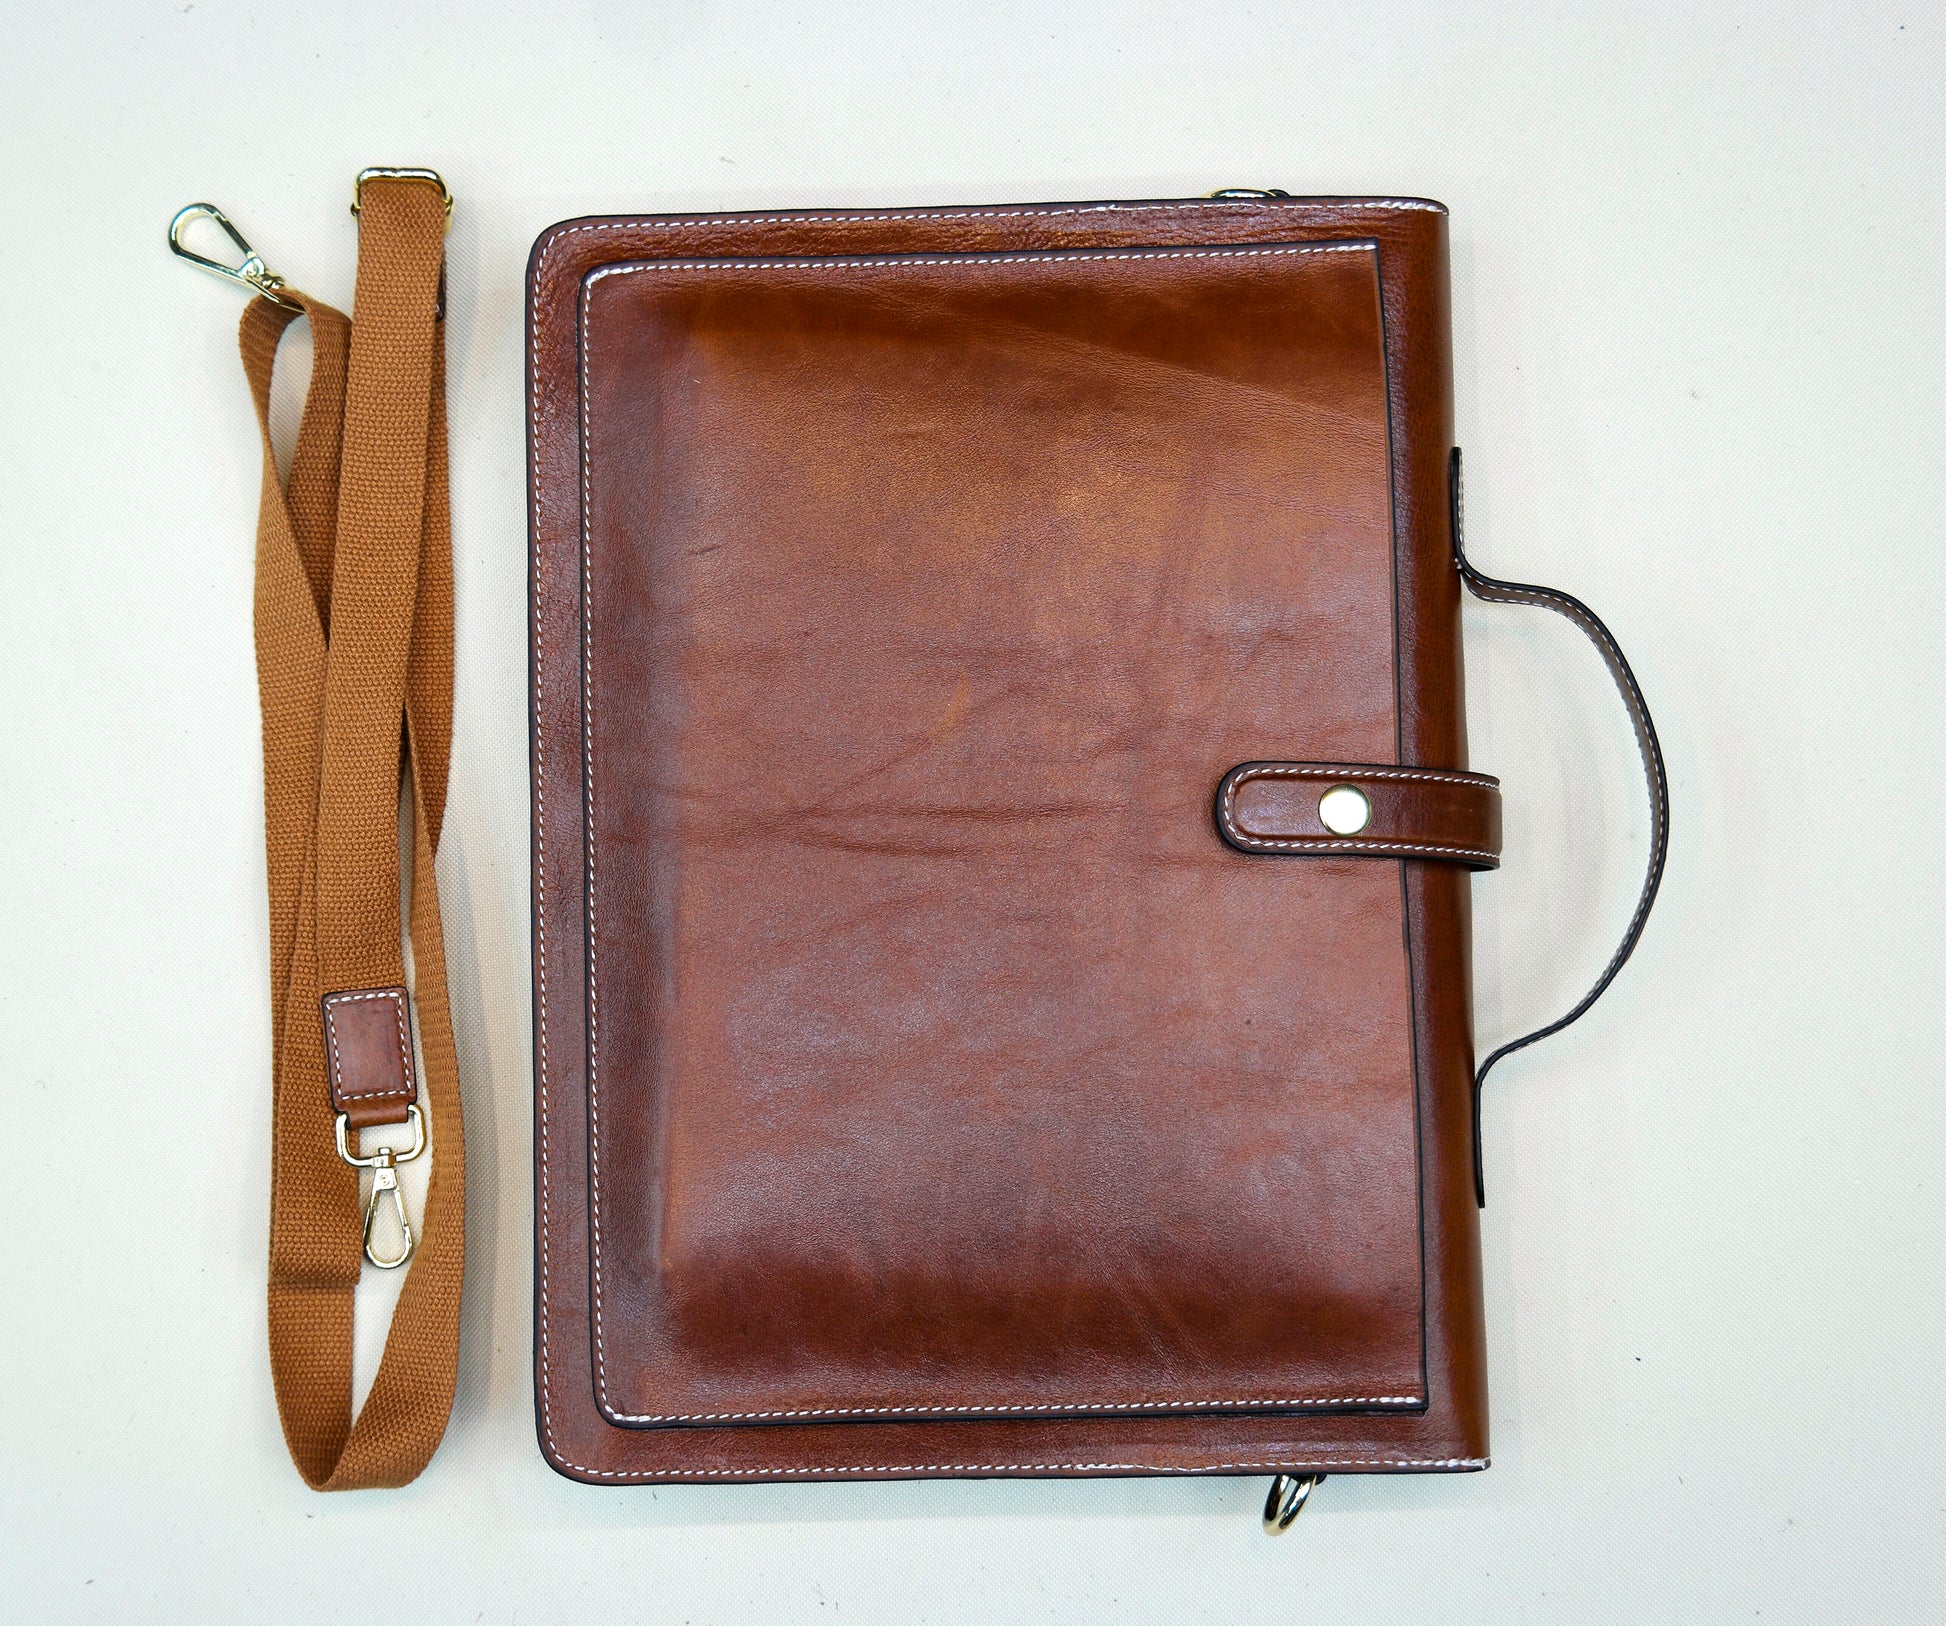 Messenger bag and office bag made of cowhide,Briefcase, laptop bag